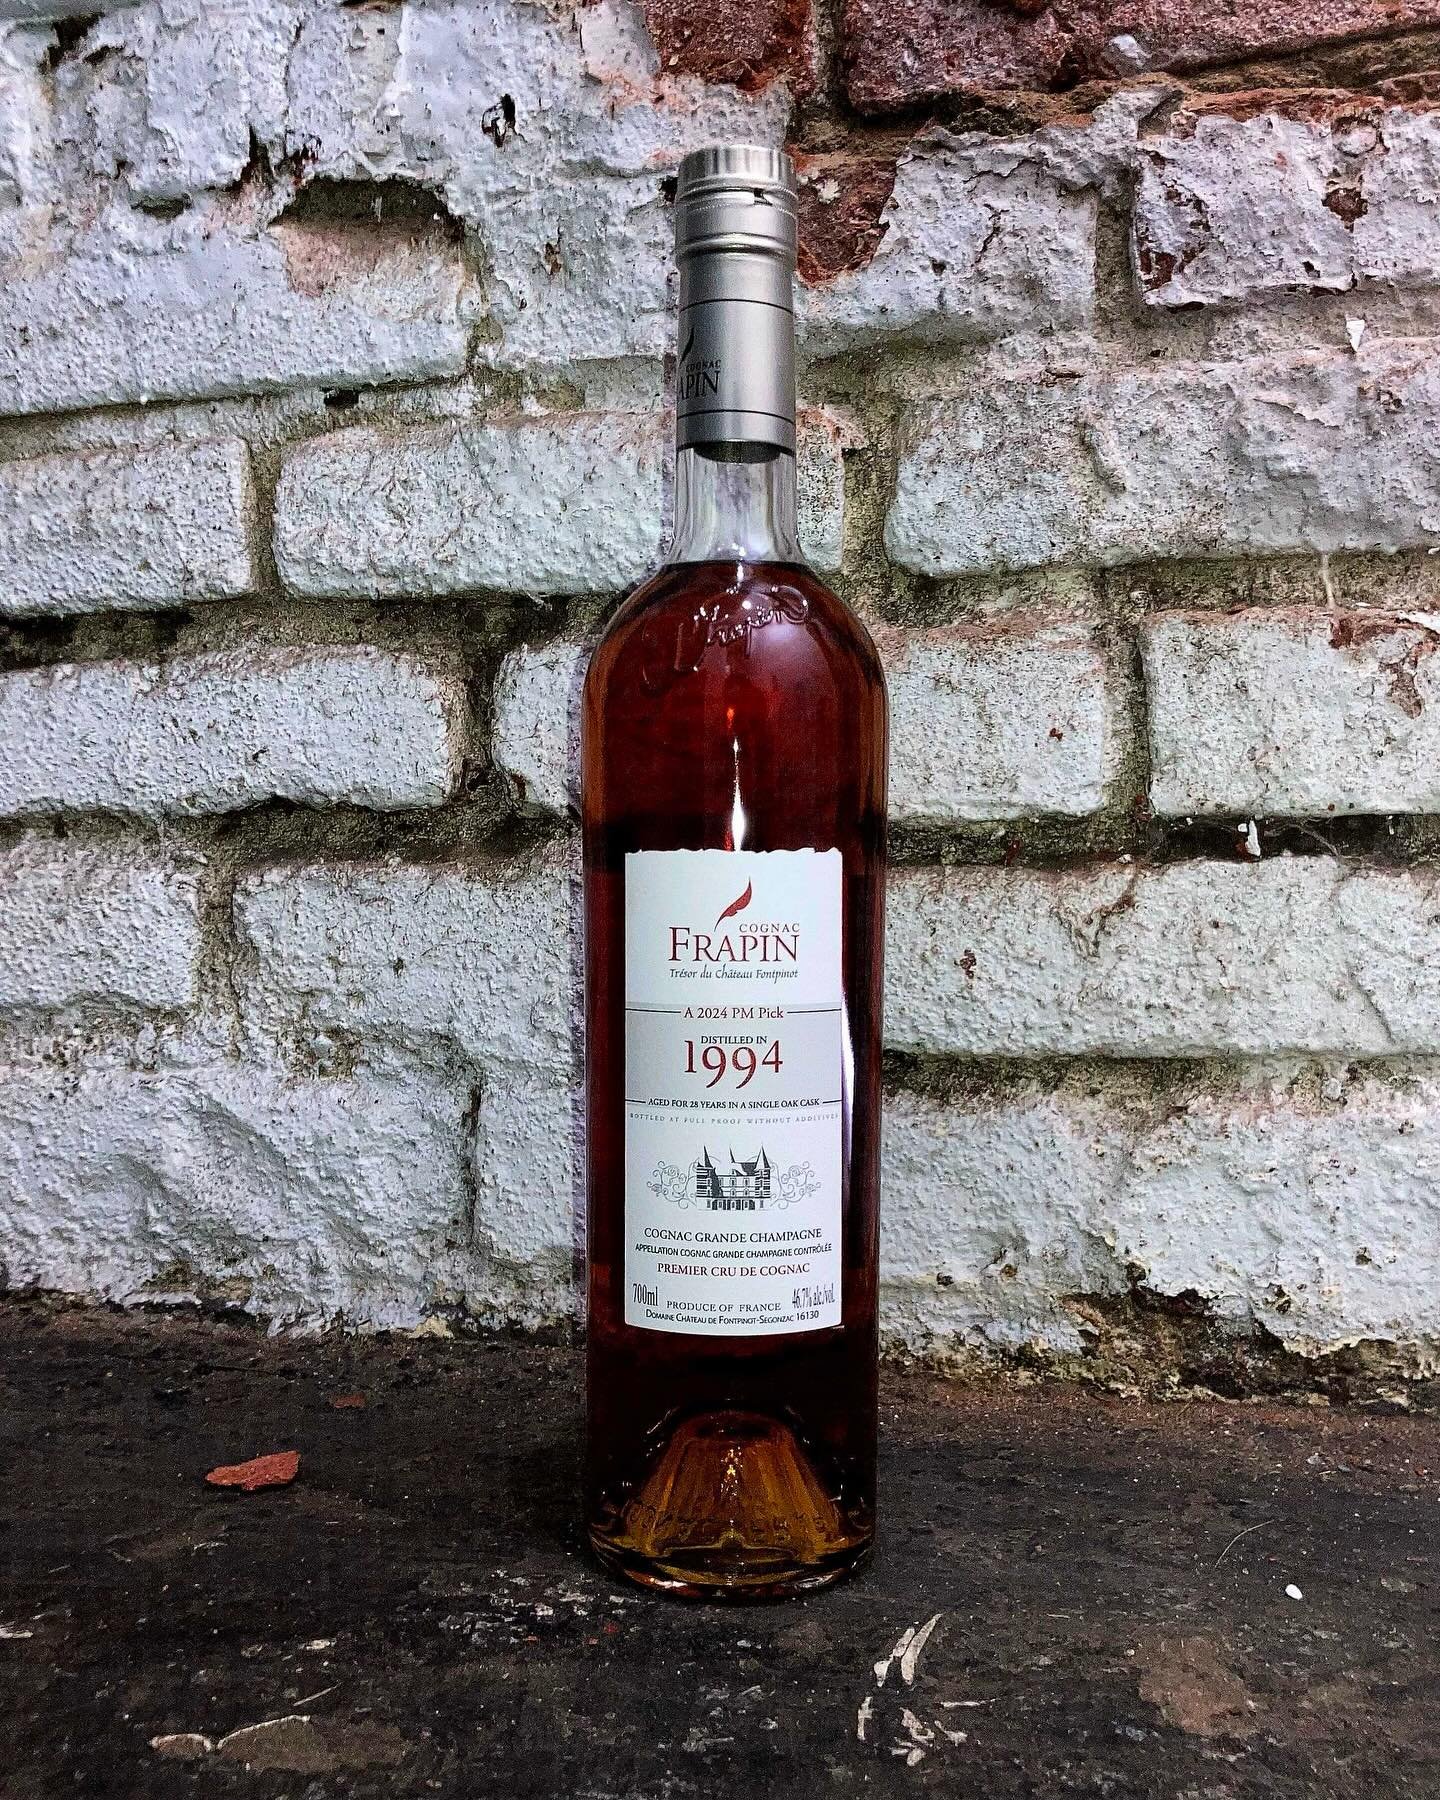 It&rsquo;s here &ndash; the FIRST EVER full proof, single cask bottling of Frapin Cognac. Distilled in 1994 and aged for 28 years, it was selected by PM Spirits as an exclusive to the US market.

As with everything from Cognac Frapin, this was produc